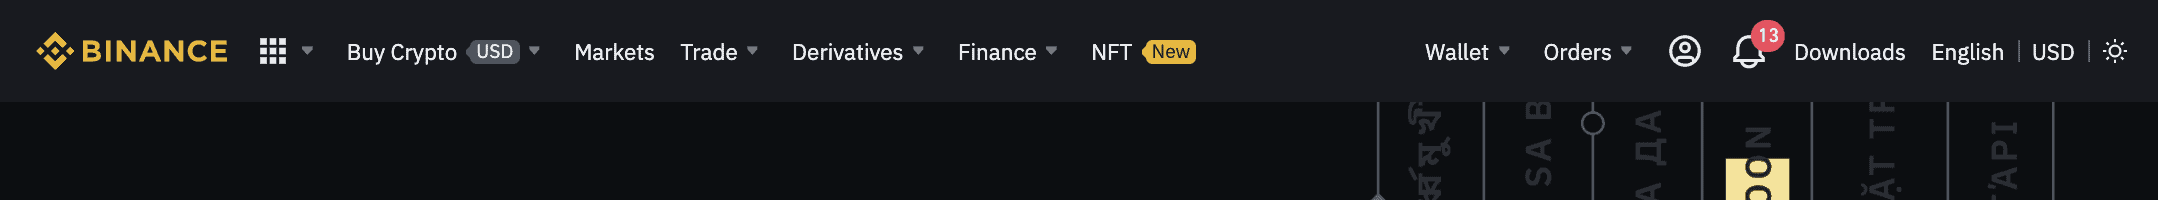 how to deactivate binance account